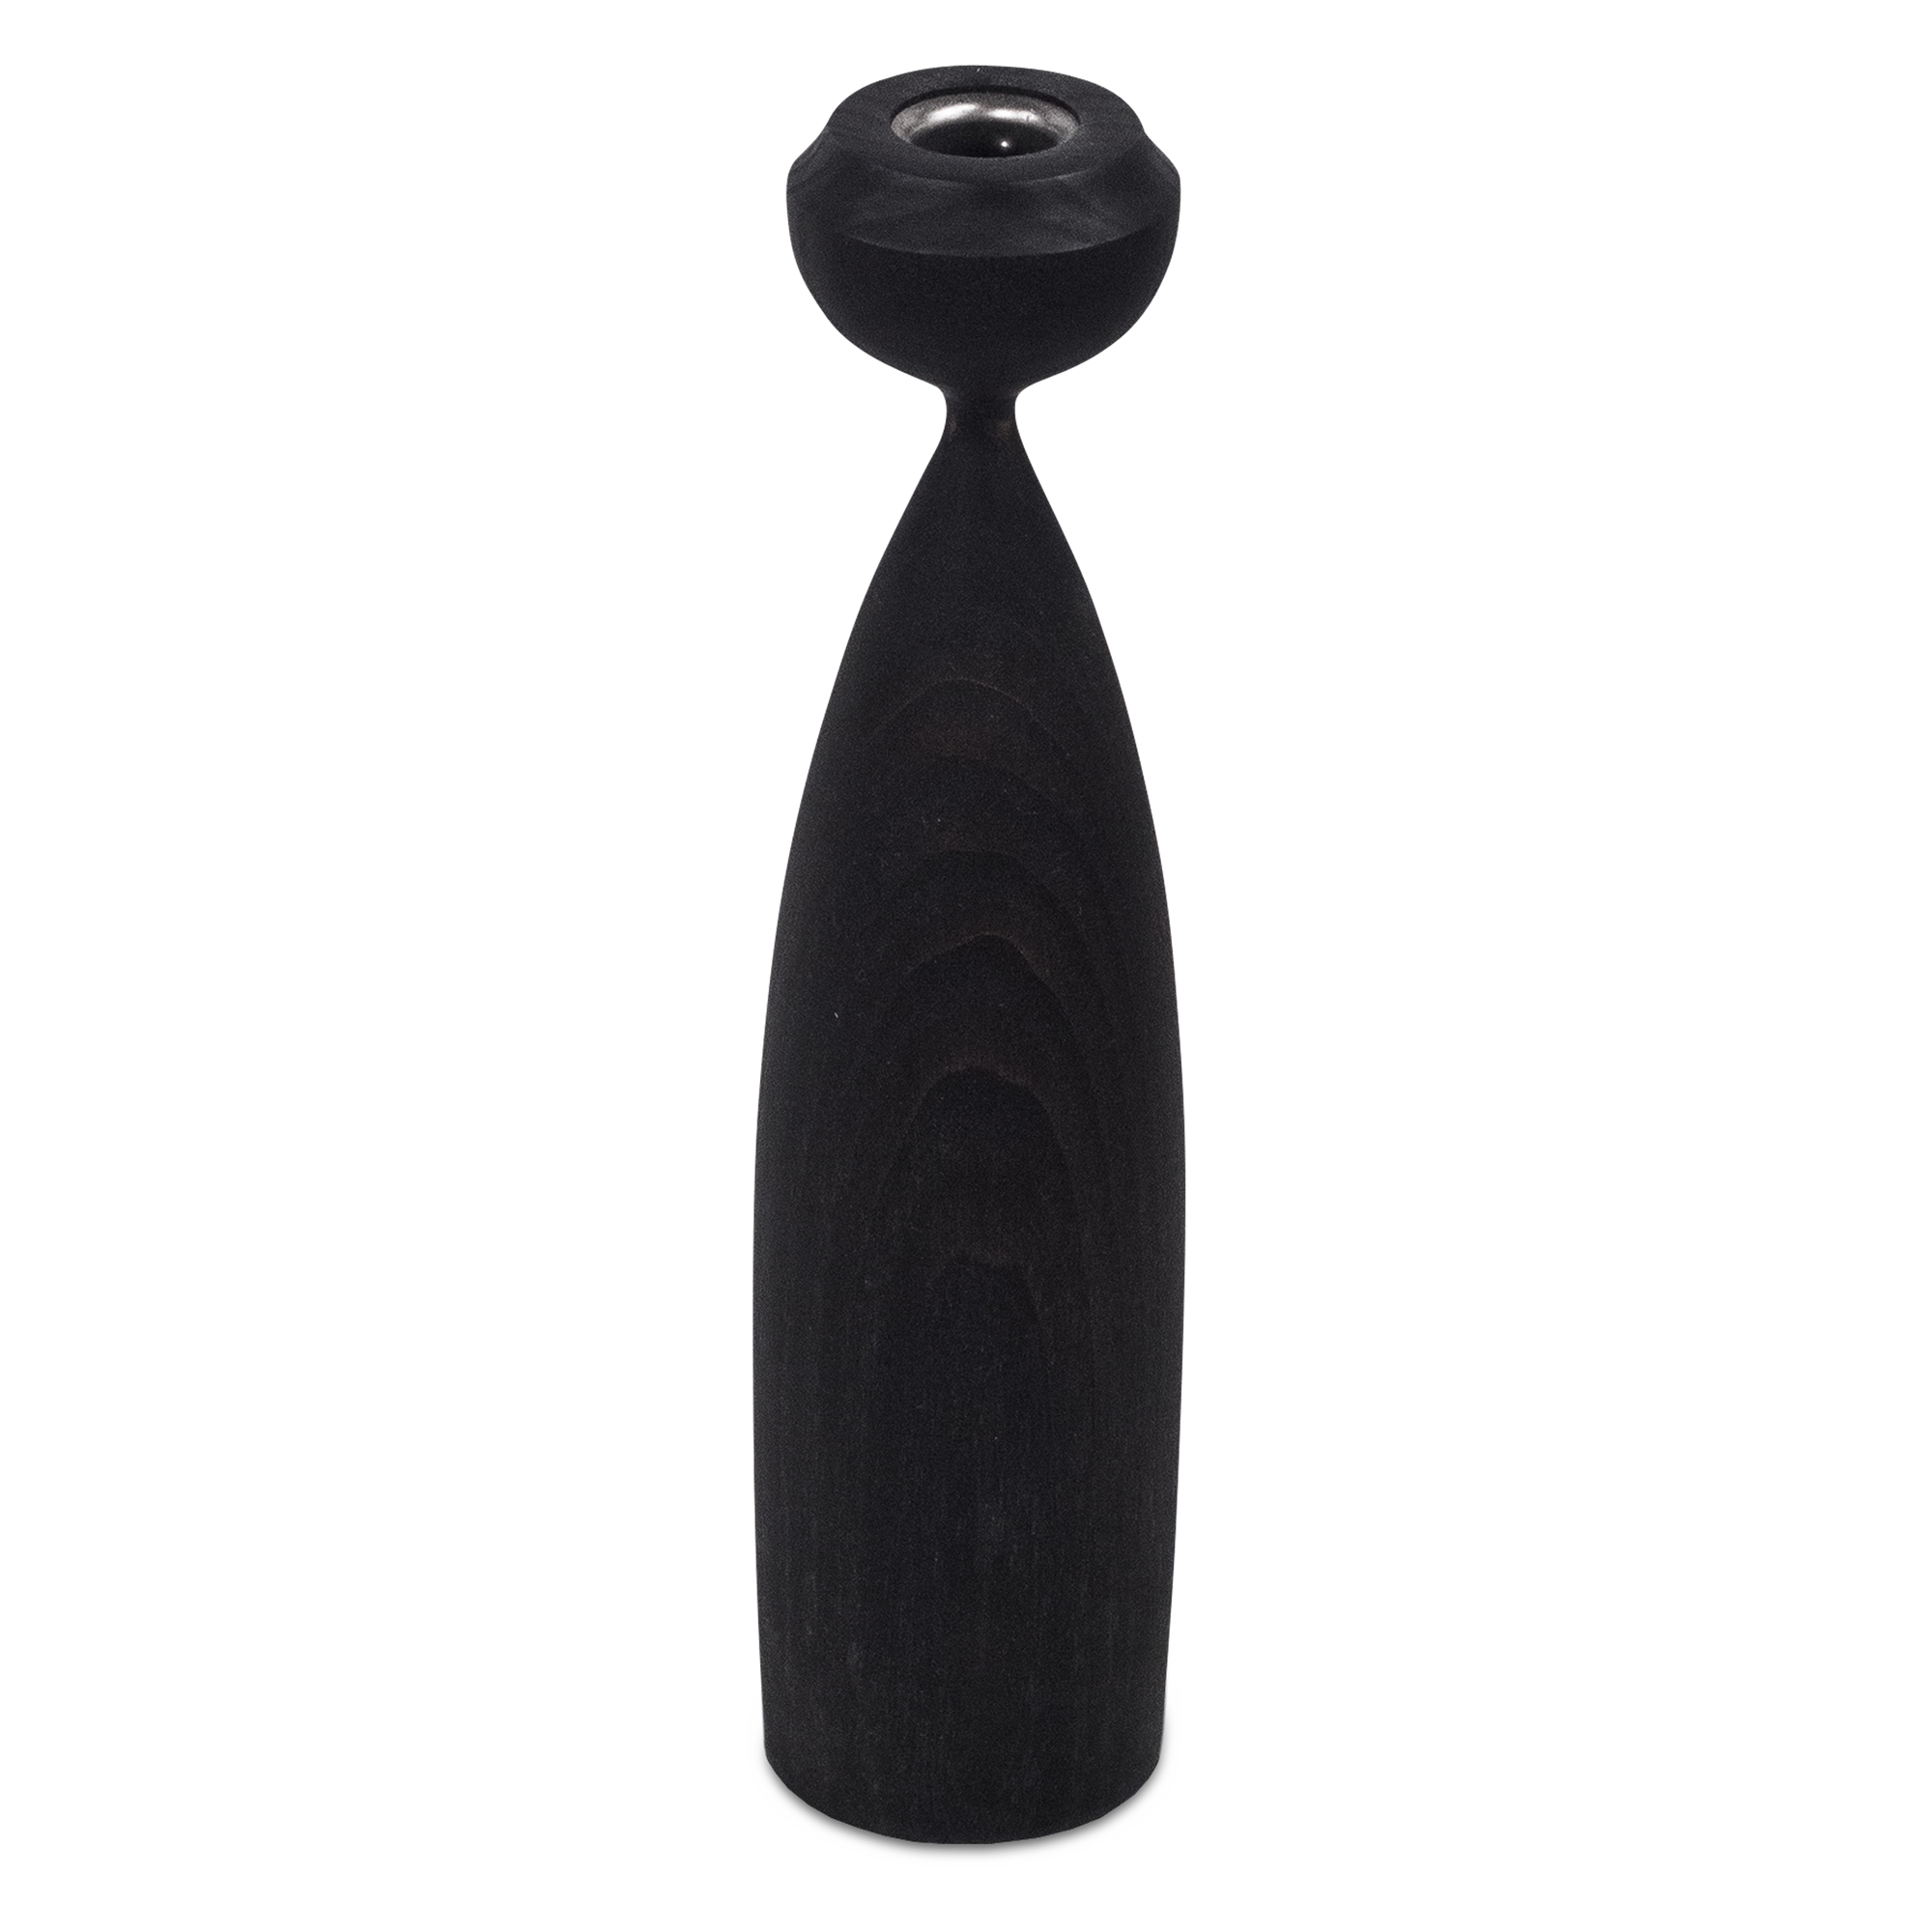 The Lotta candleholder illustrates a breathtaking combination of mid-century modern flavour and natural styling in its beautiful ebonized ash wood shape - emphasizing luxurious lin